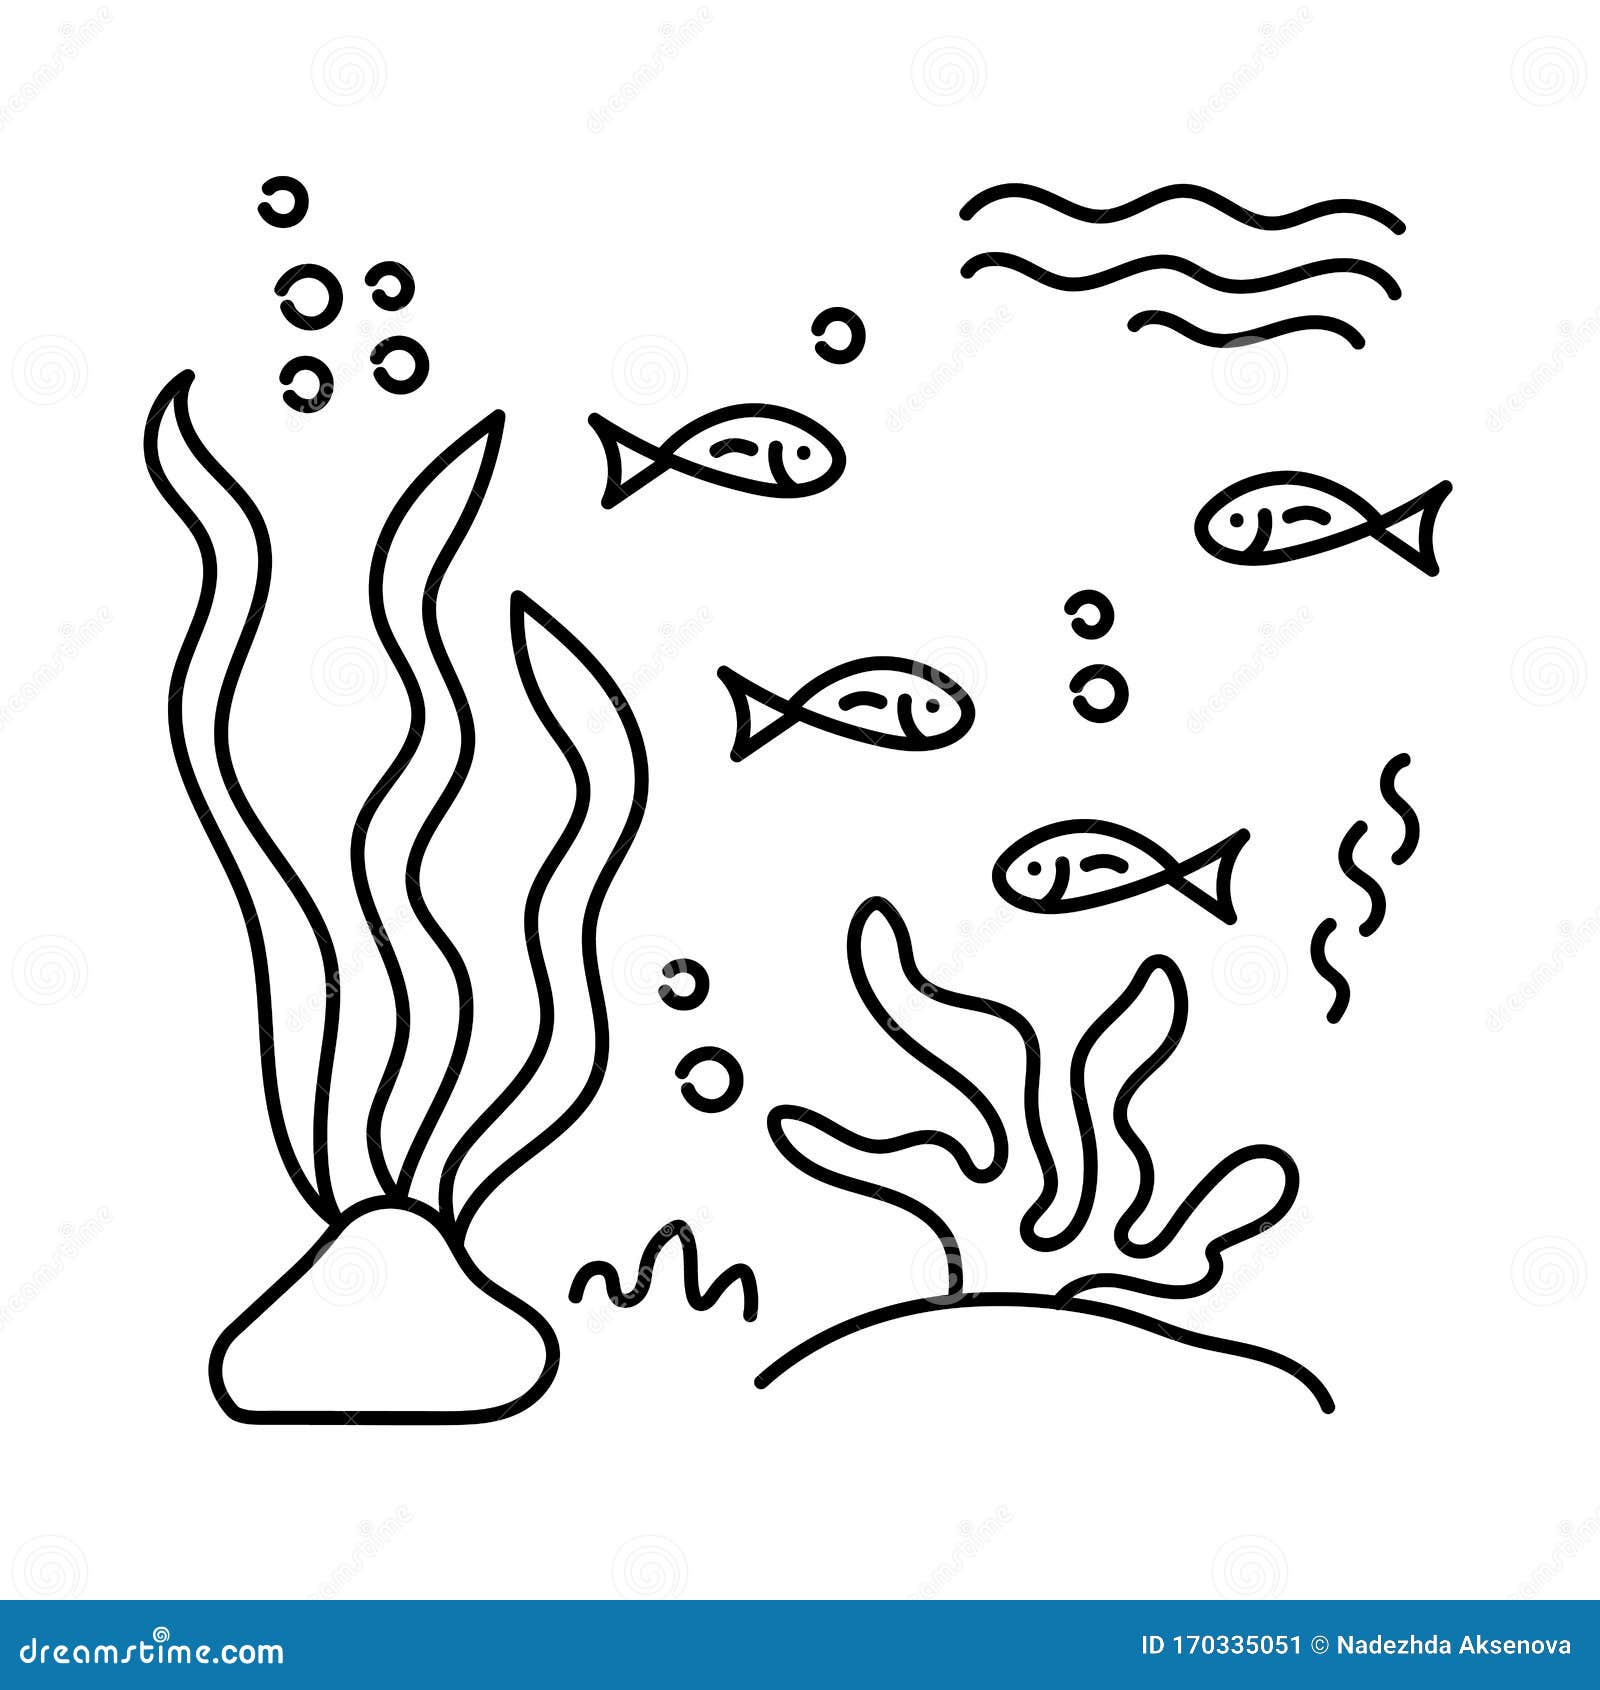 Colorings. Underwater Inhabitants and Algae, Coloring Book. Fish and Plants  Stock Illustration - Illustration of ocean, inhabitants: 170335051